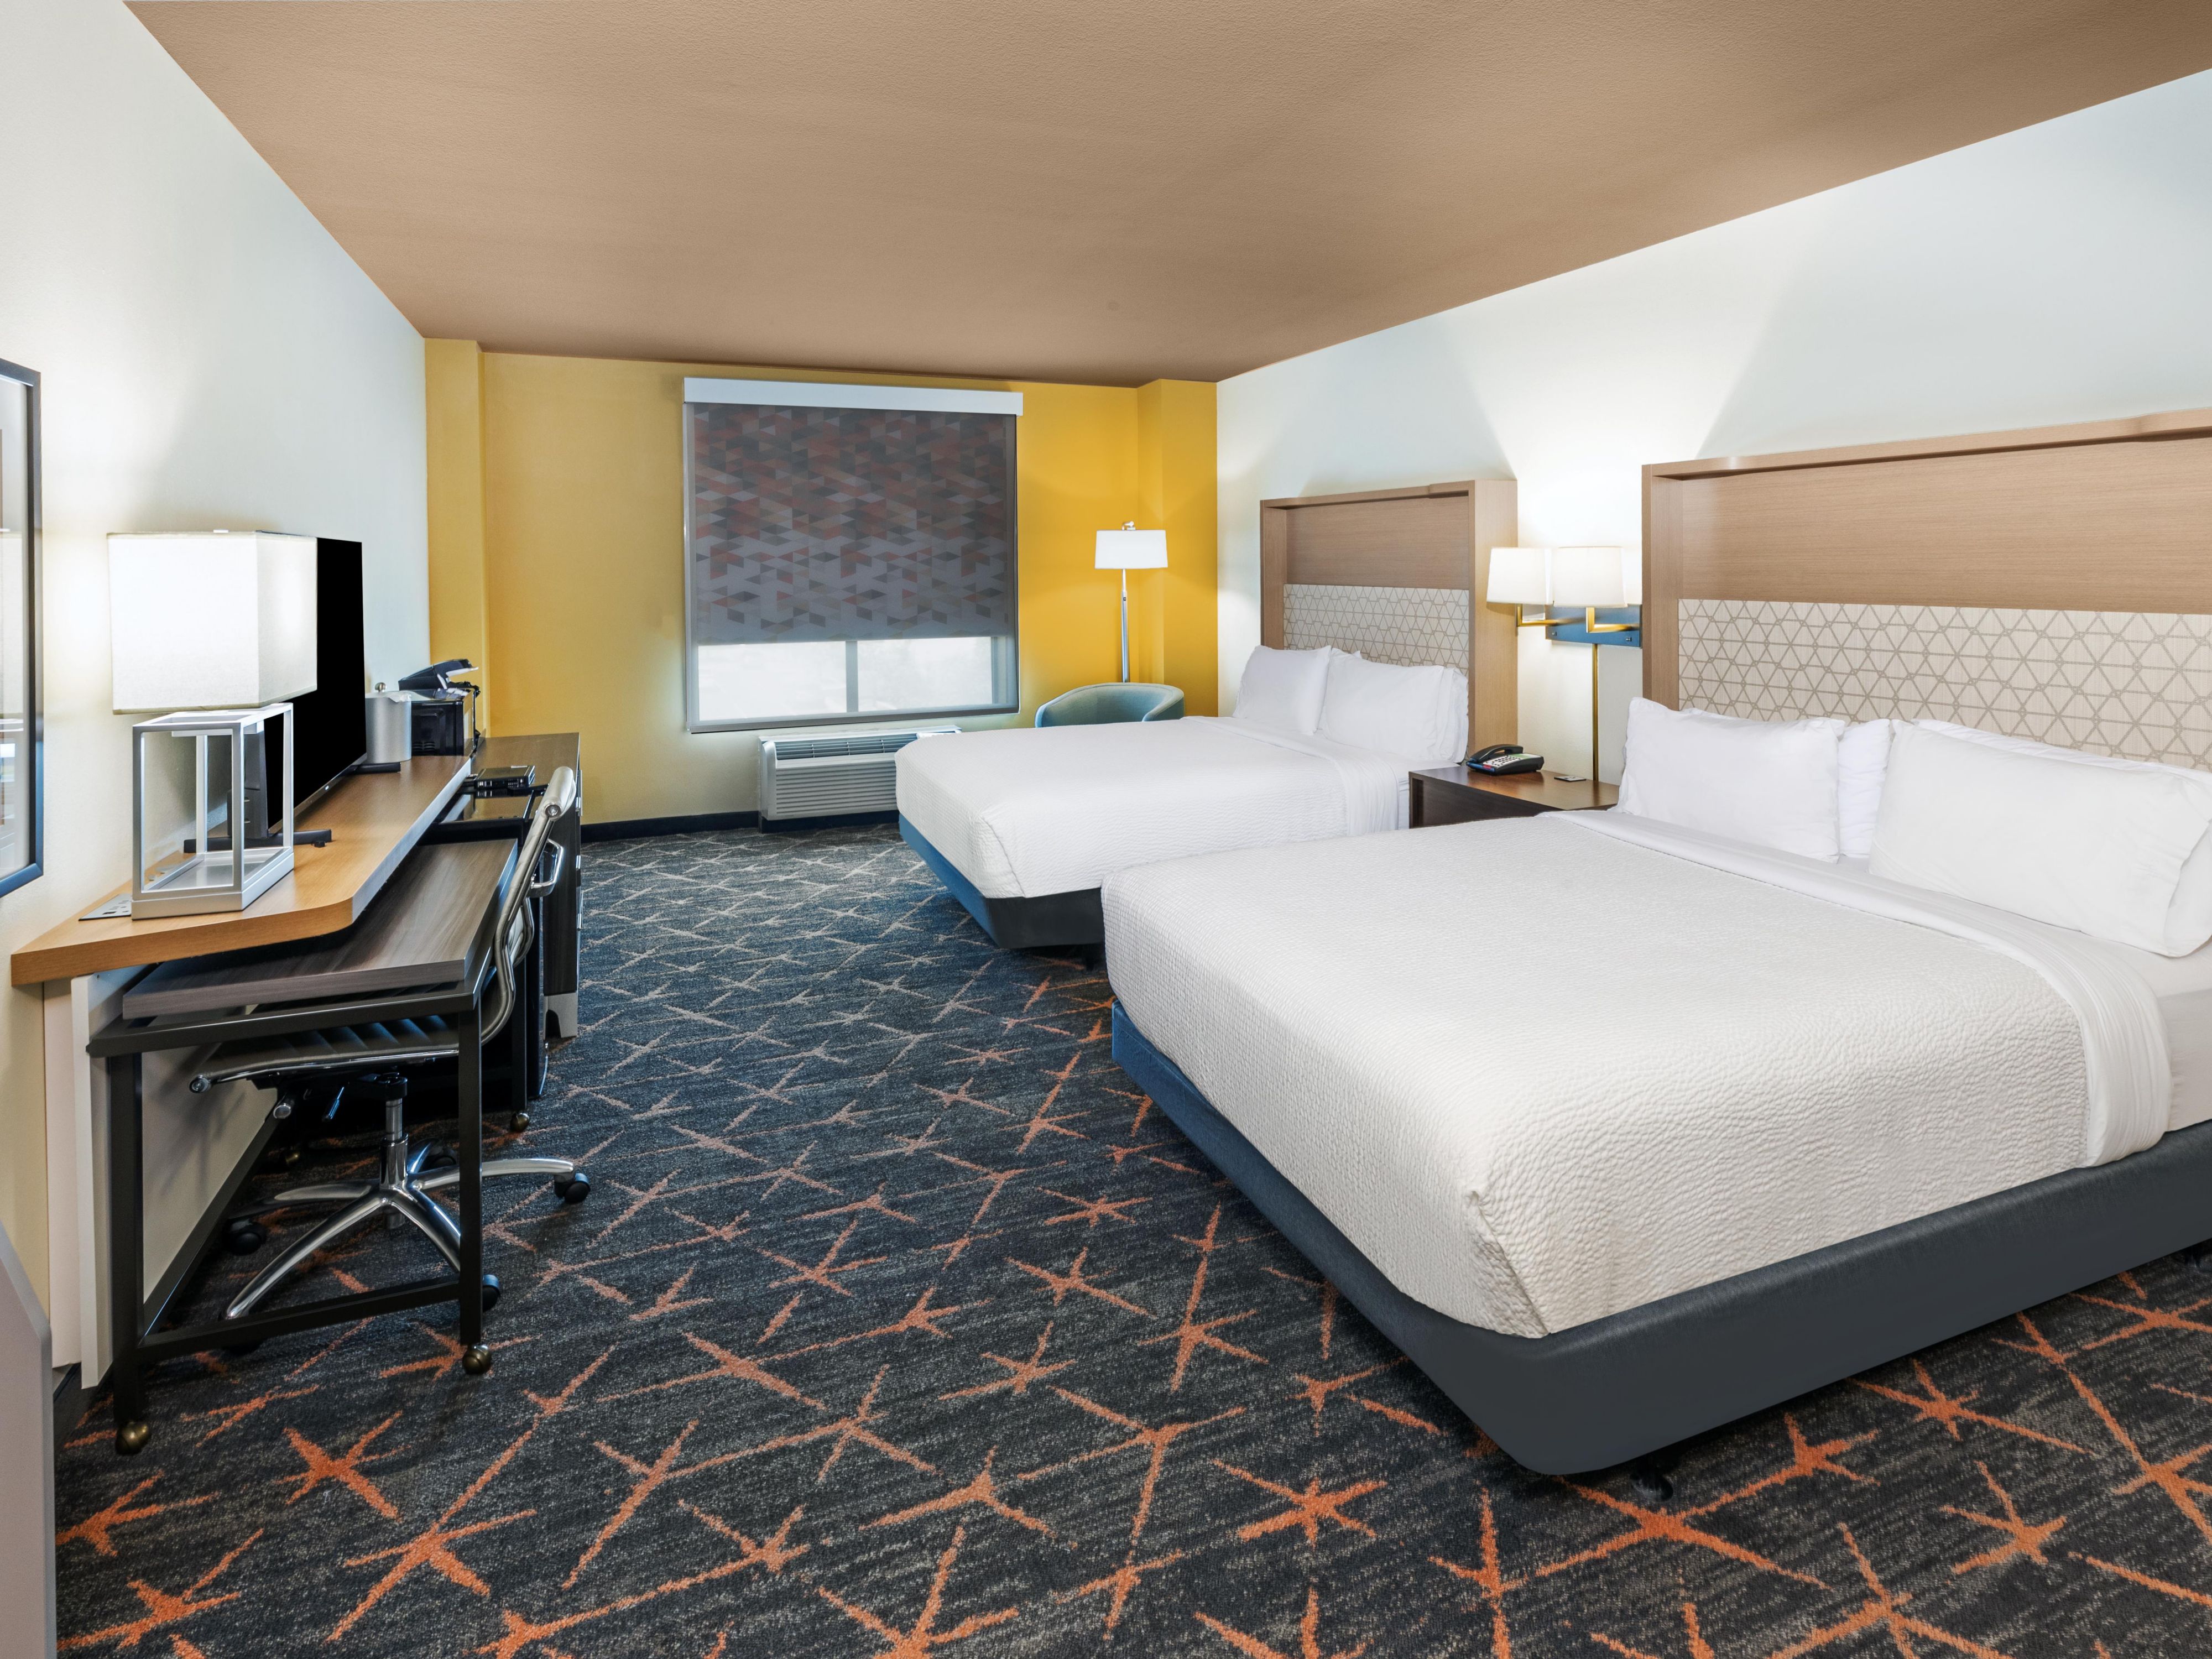 Newly Renovated! Come explore our revamped rooms, restaurant and fitness center. Updates include a new look, updated furnishings and refreshed restaurant and bar. 